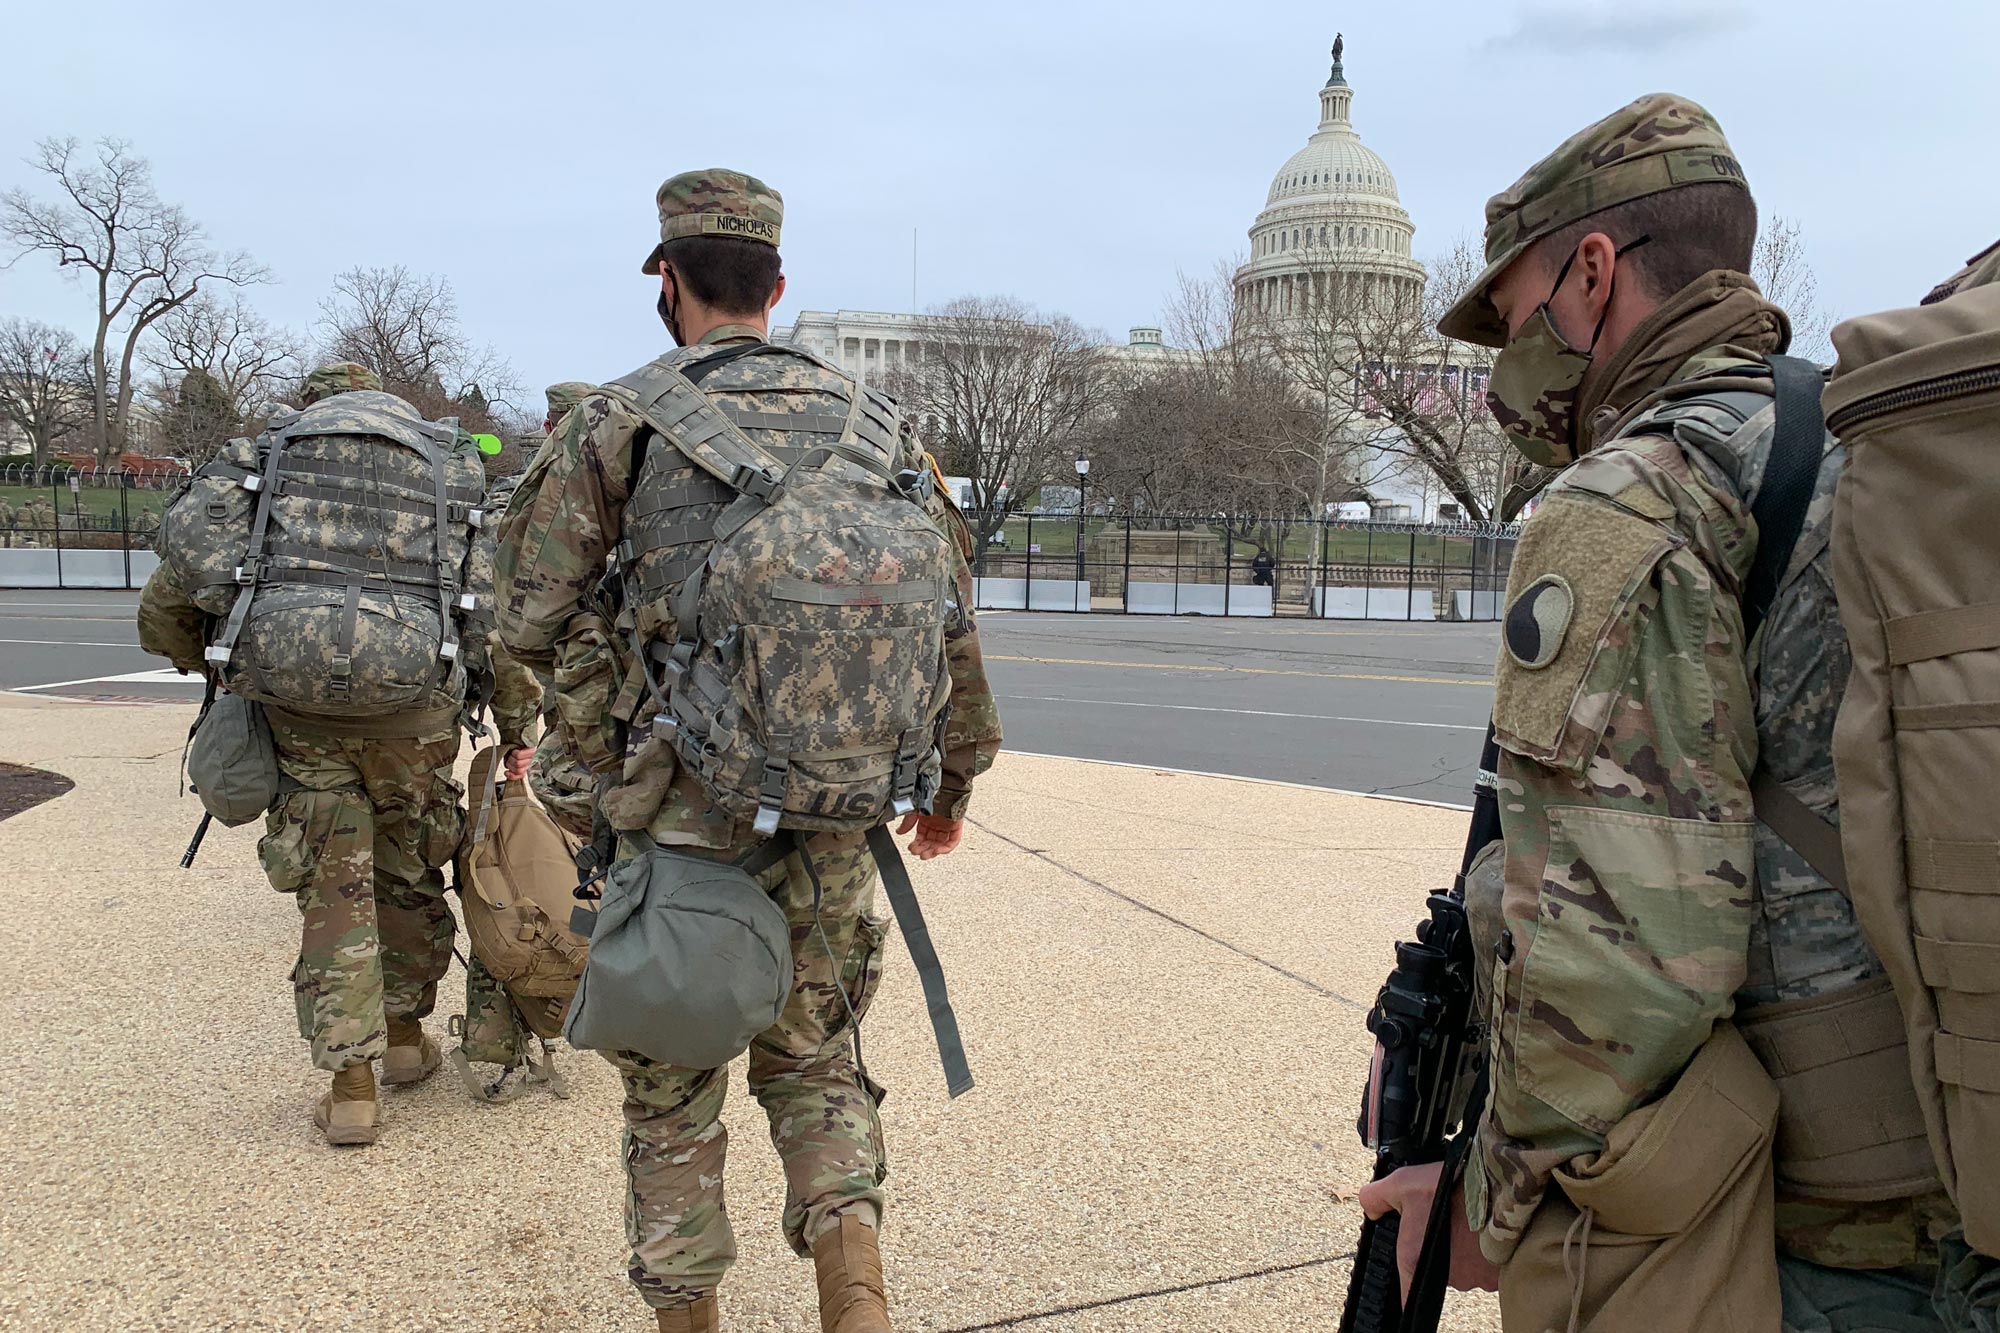 National Guardsmen walking the streets of Washington DC to the US Capitol building